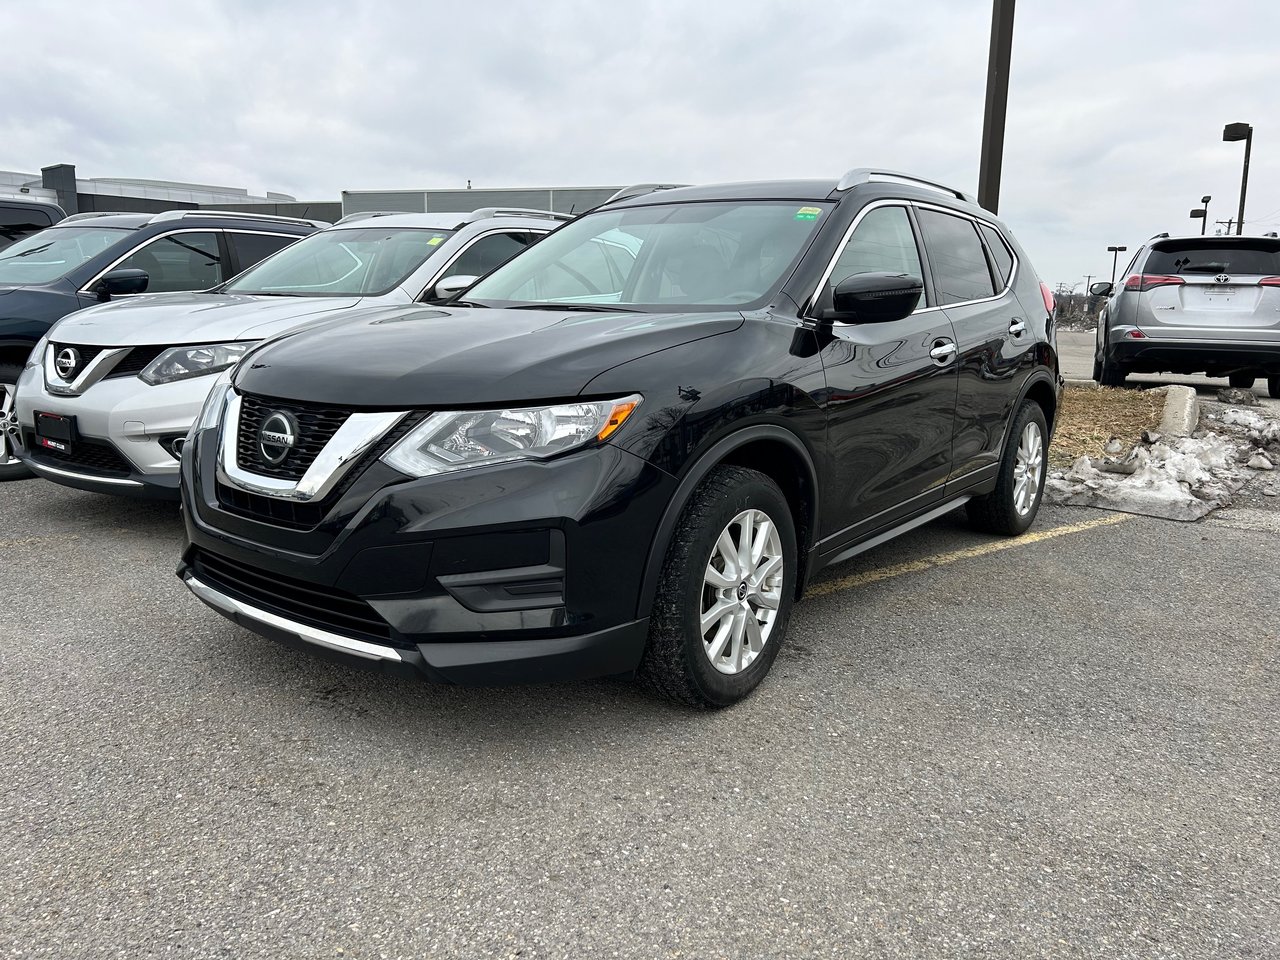 2019 Nissan Rogue S special edition